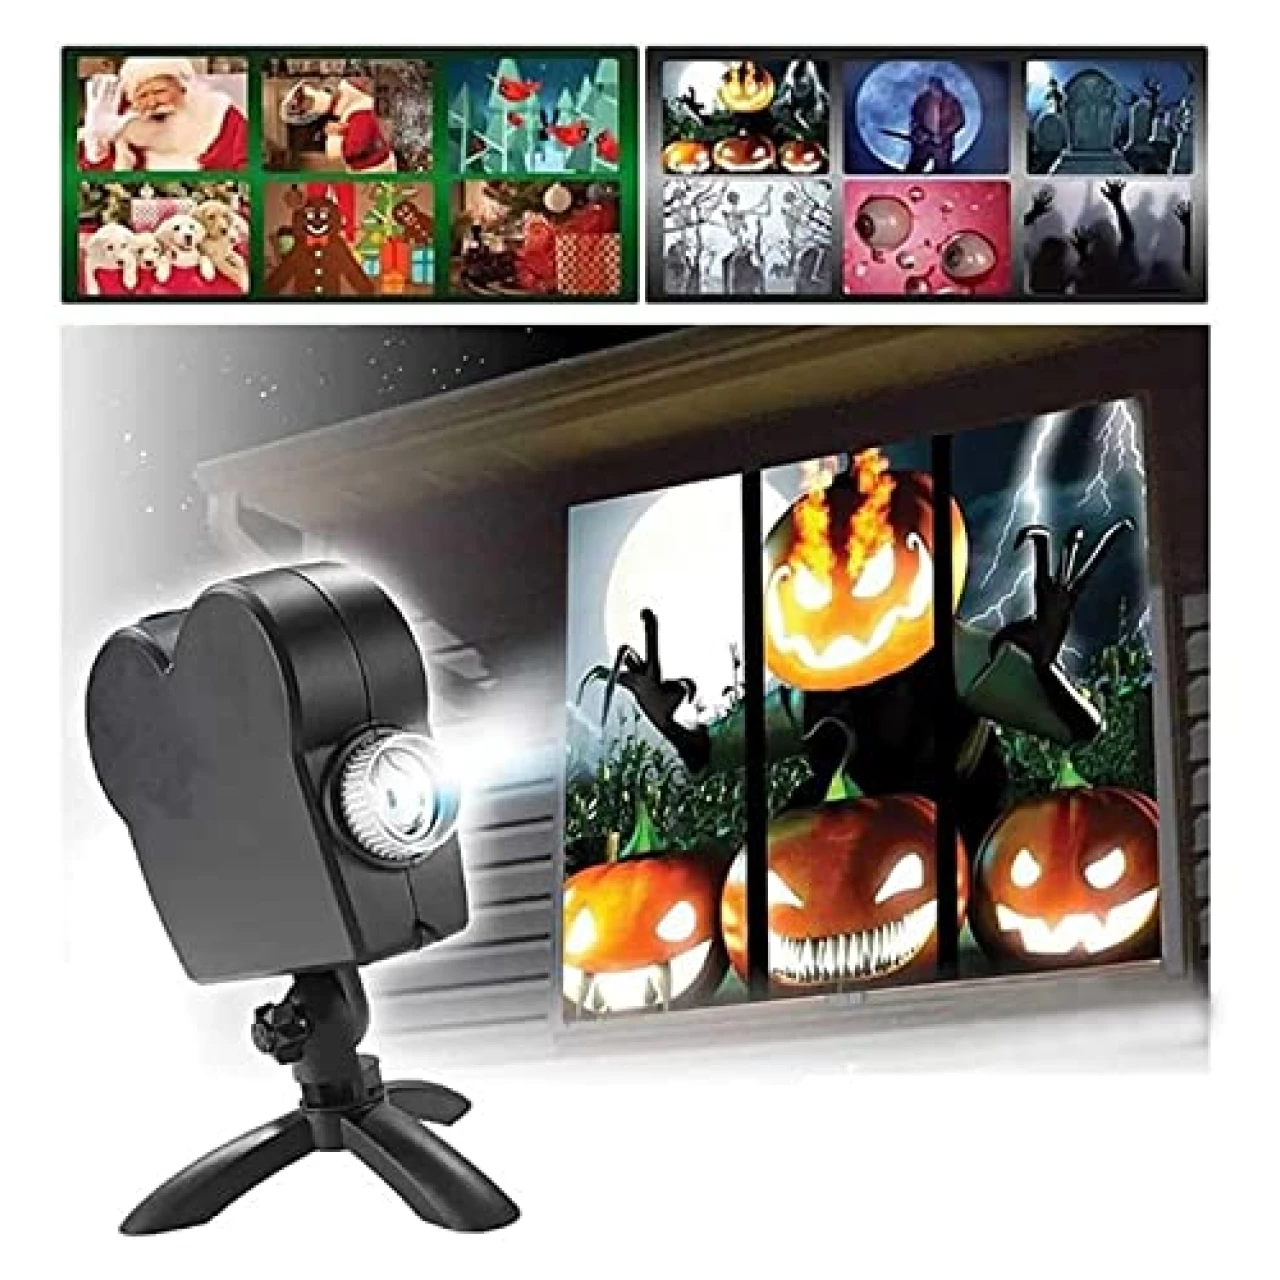 DEIOVR Halloween Holographic Projection Kit with A Tripod, Christmas Led Projector Lights, 12 Patterns for Perfect Christmas and Halloween Outdoor Decorations